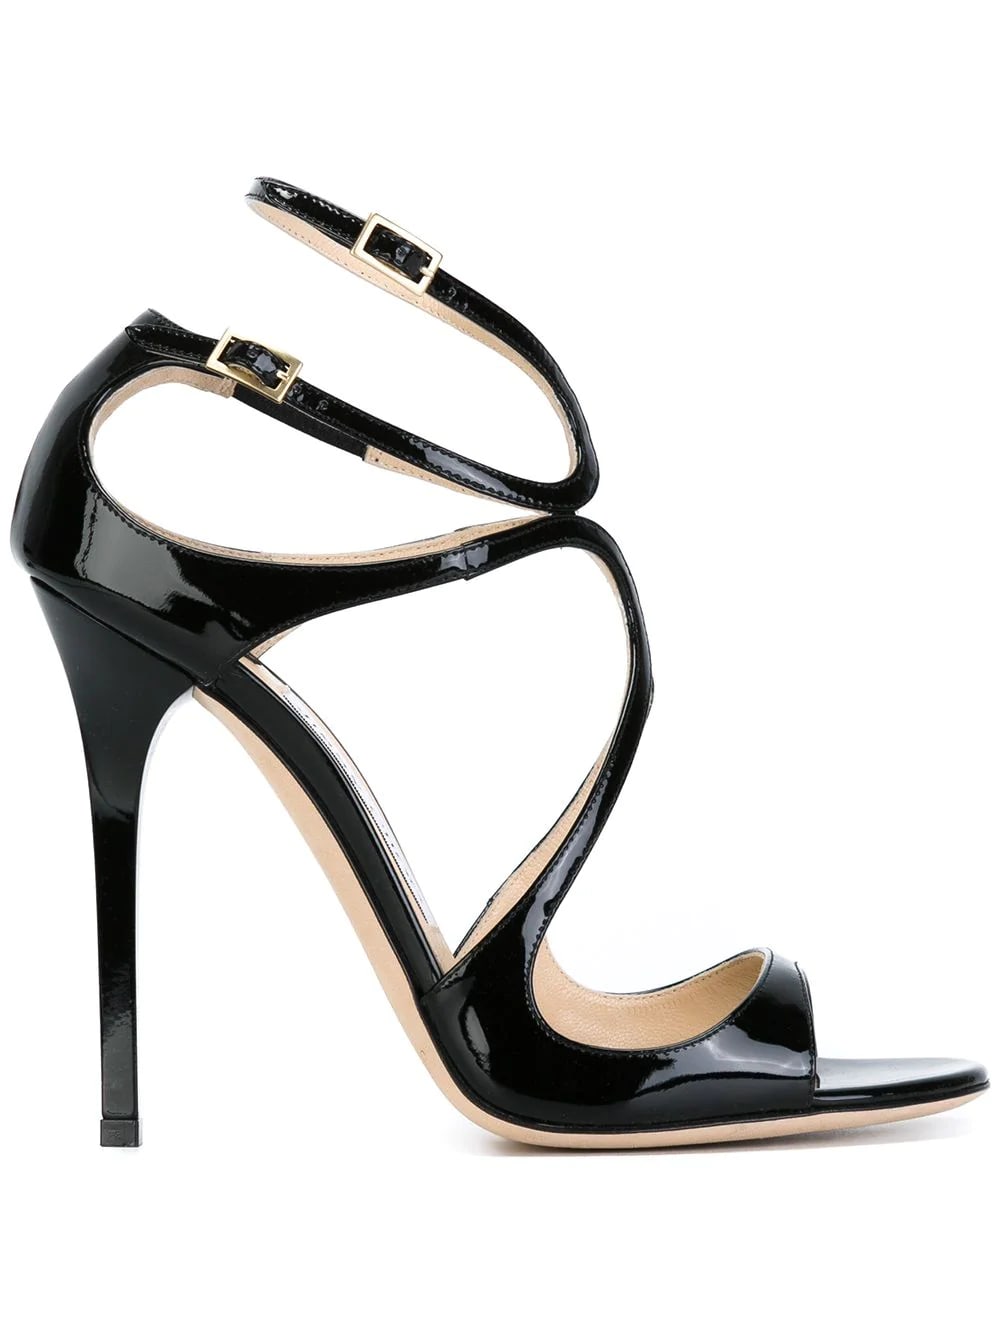 Buy Jimmy Choo Black Patent Leather Lance Sandal online, shop Jimmy Choo shoes with free shipping